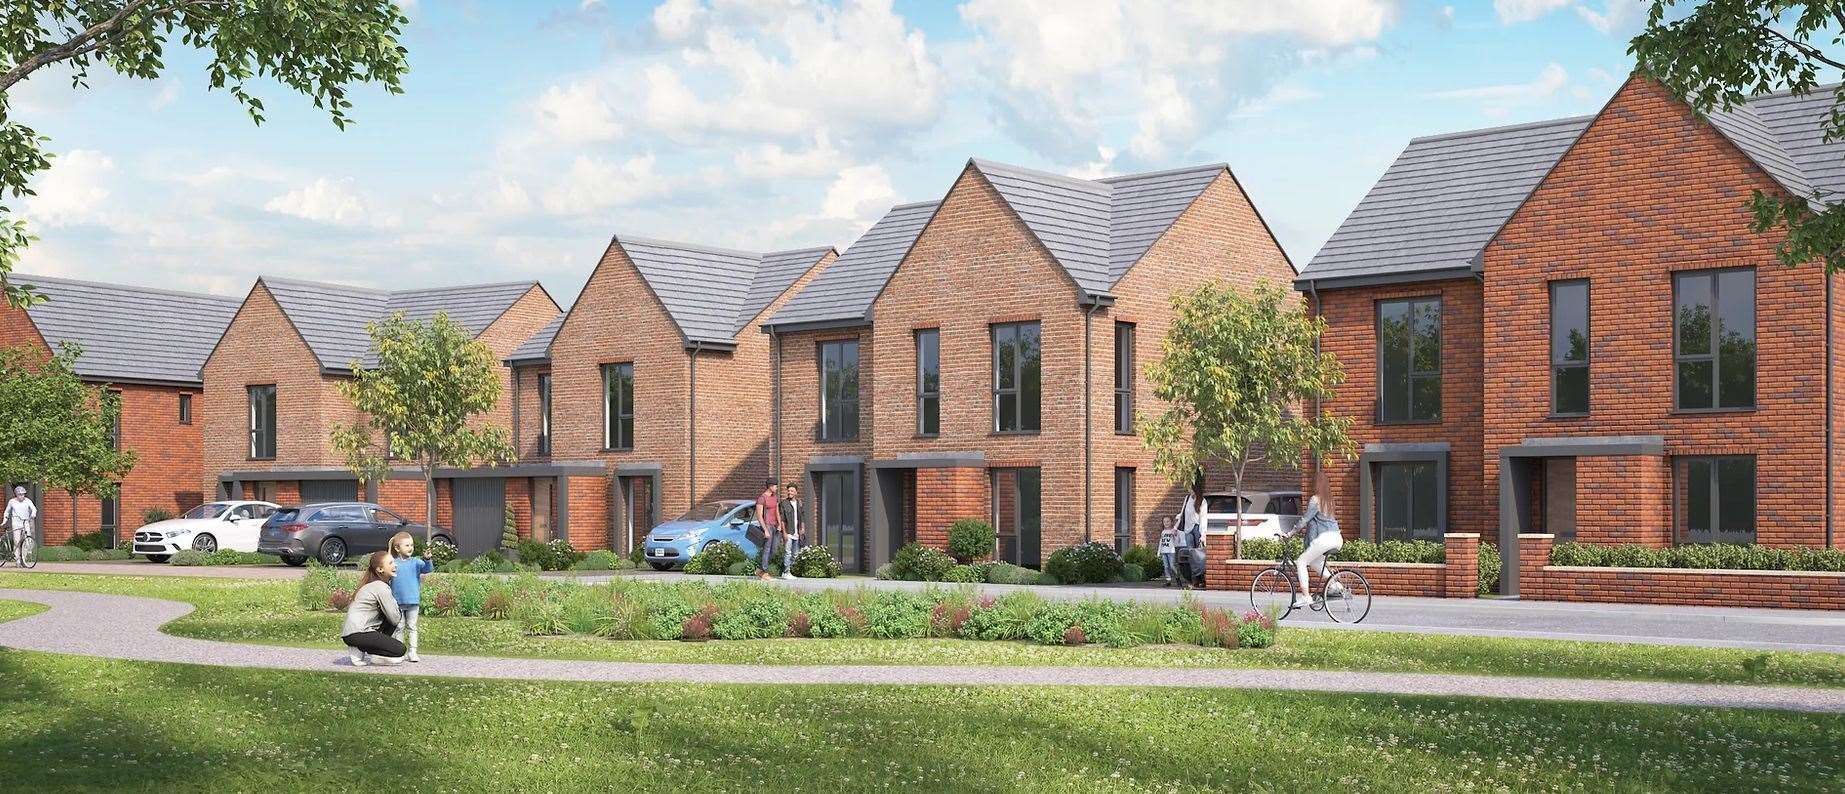 CGIs reveal how the homes could look. Picture: Rooksmead